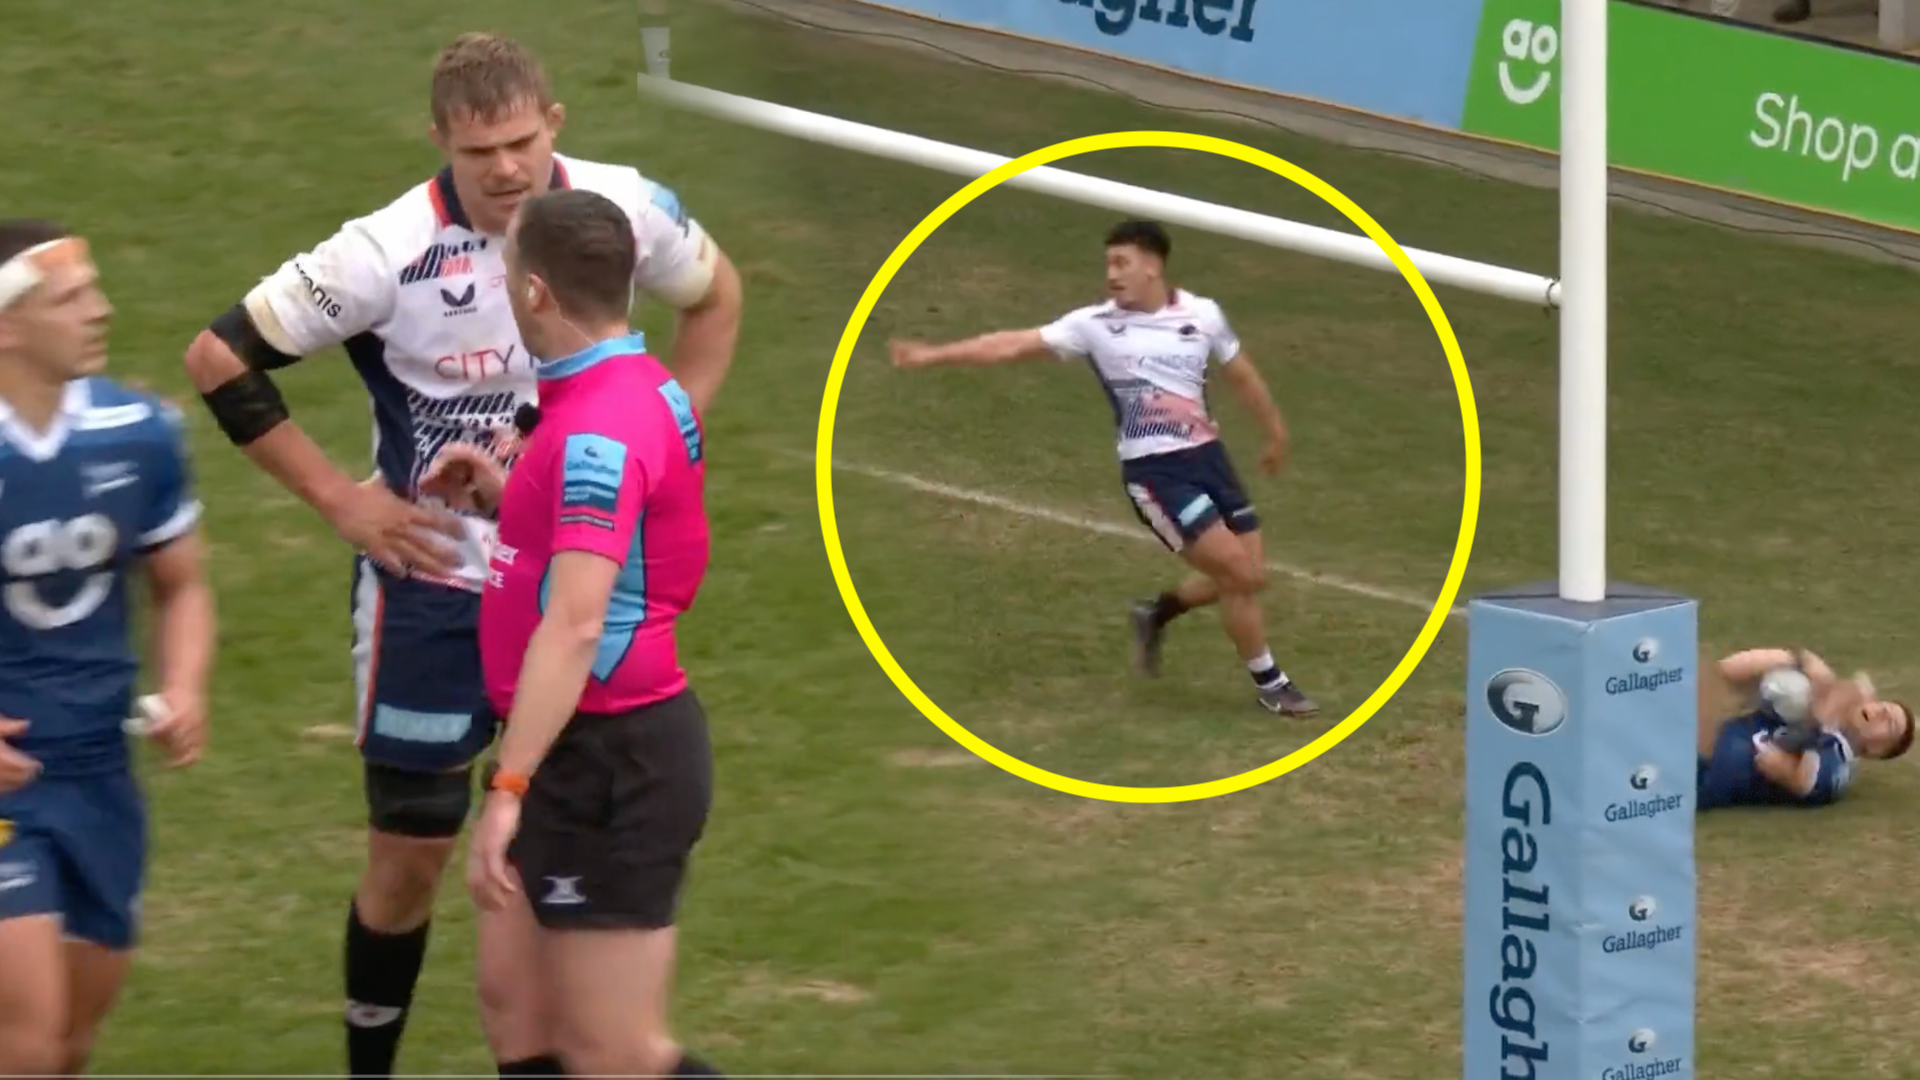 The hugely controversial moment that might define the Premiership season